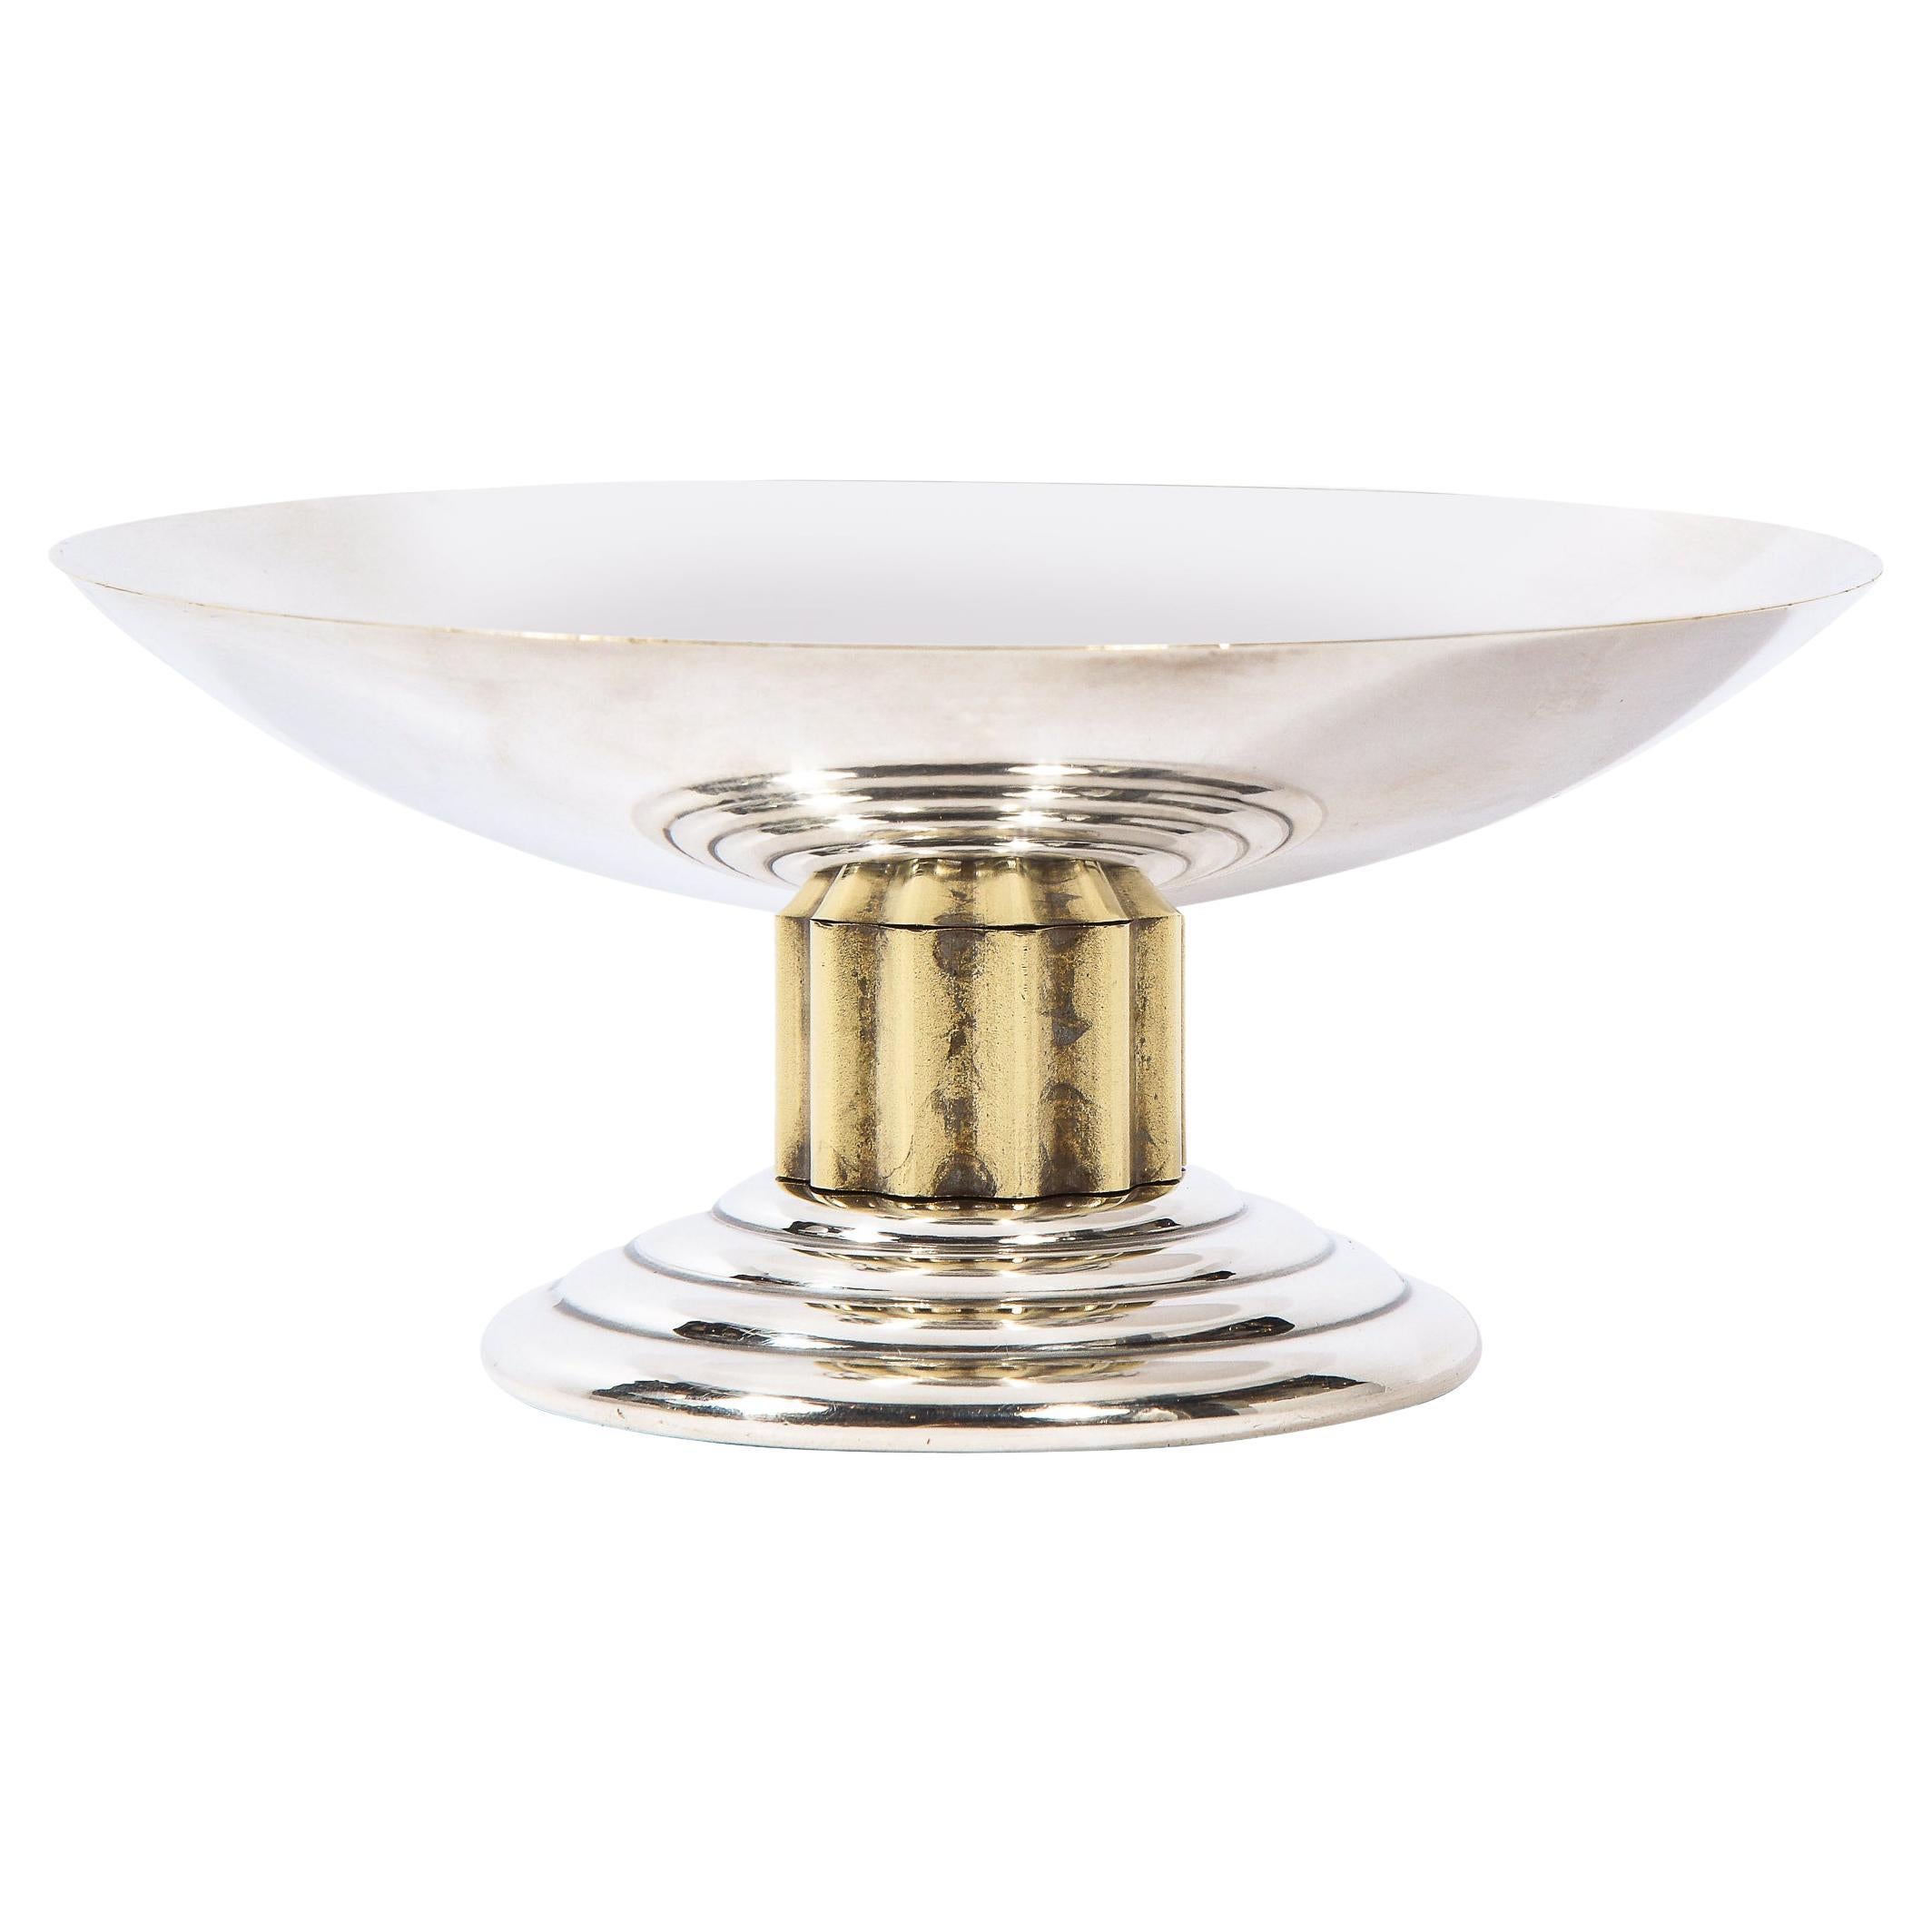 Mid Century Skyscraper Art Deco Style Silverplate and Gilt Dish by Puiforcat